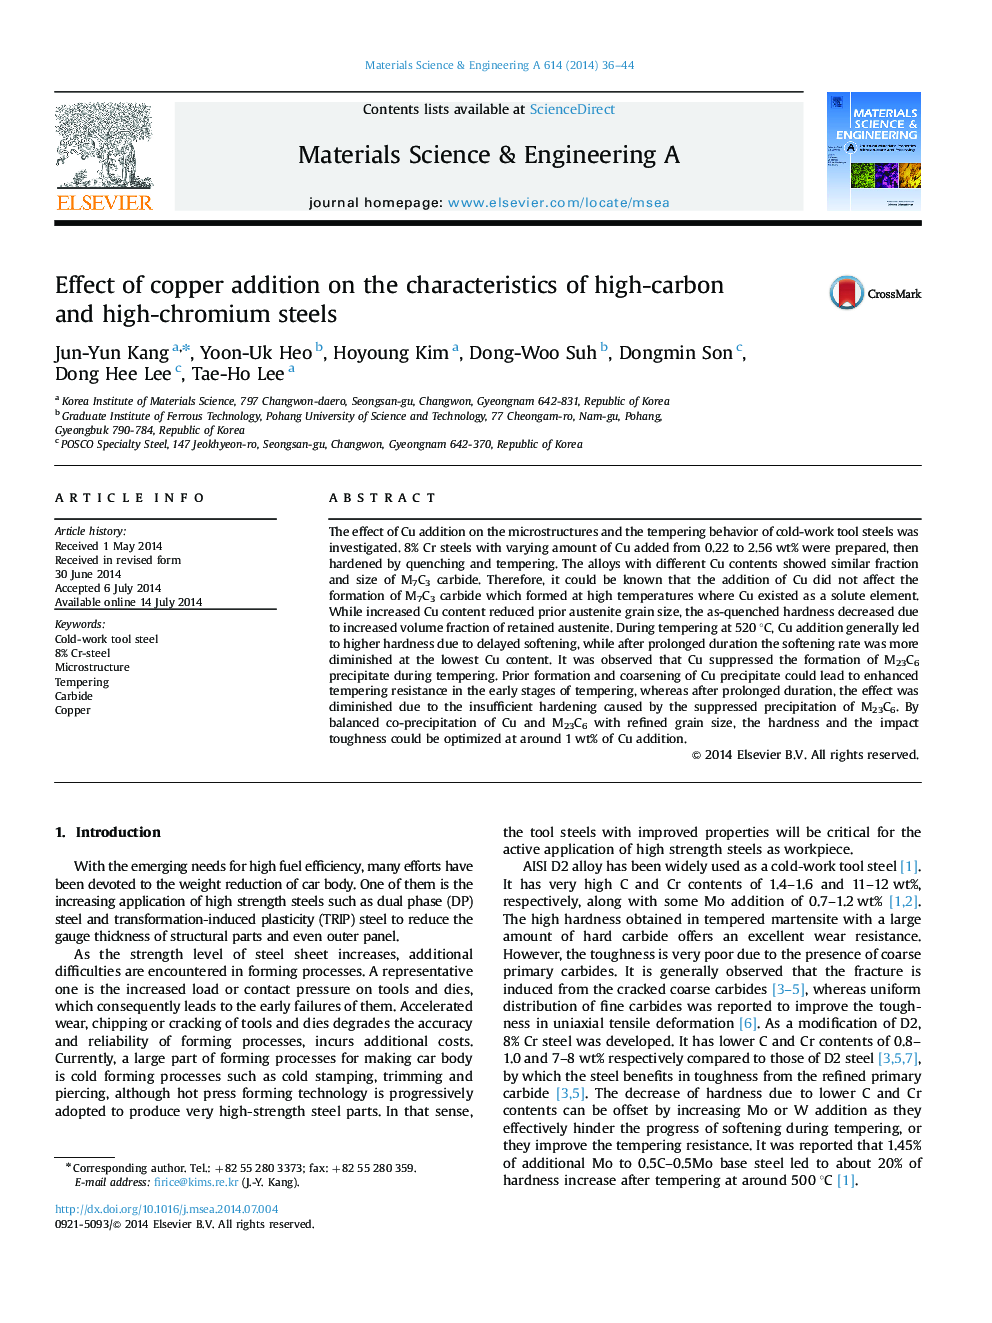 Effect of copper addition on the characteristics of high-carbon and high-chromium steels